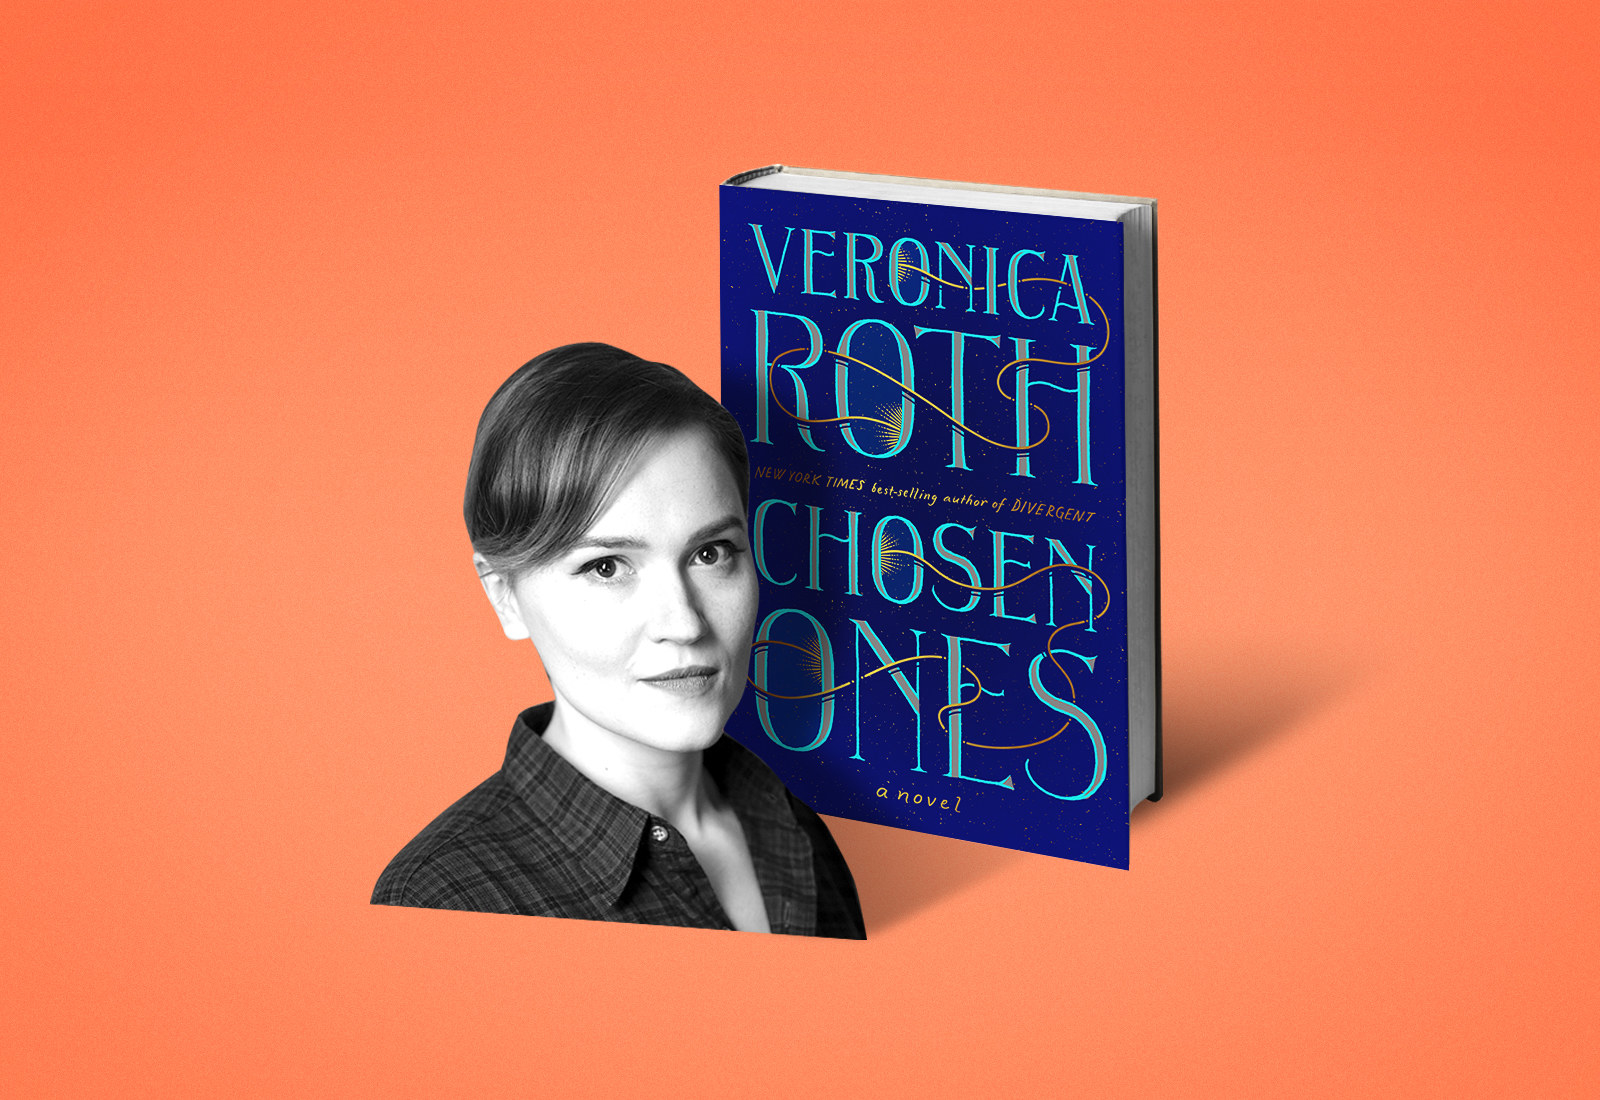 Veronica Roth's Chosen Ones Is The BuzzFeed Book Club May Pick